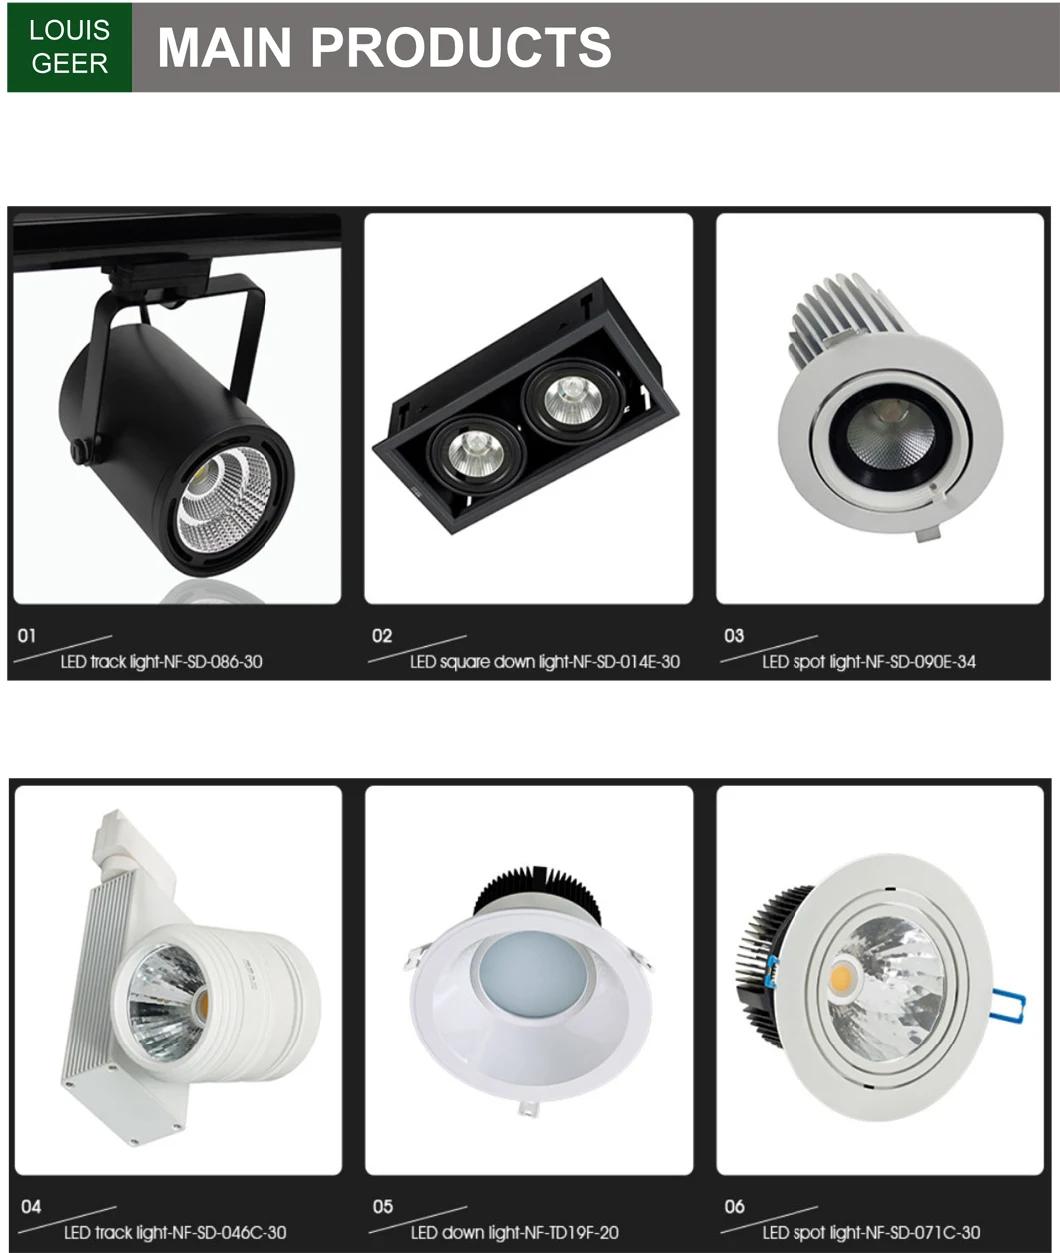 New Surface Mounted Recessed Flower Ceiling 4 Inch 7 Inch Anti-Glare for Home and Mall Shop LED Down Light